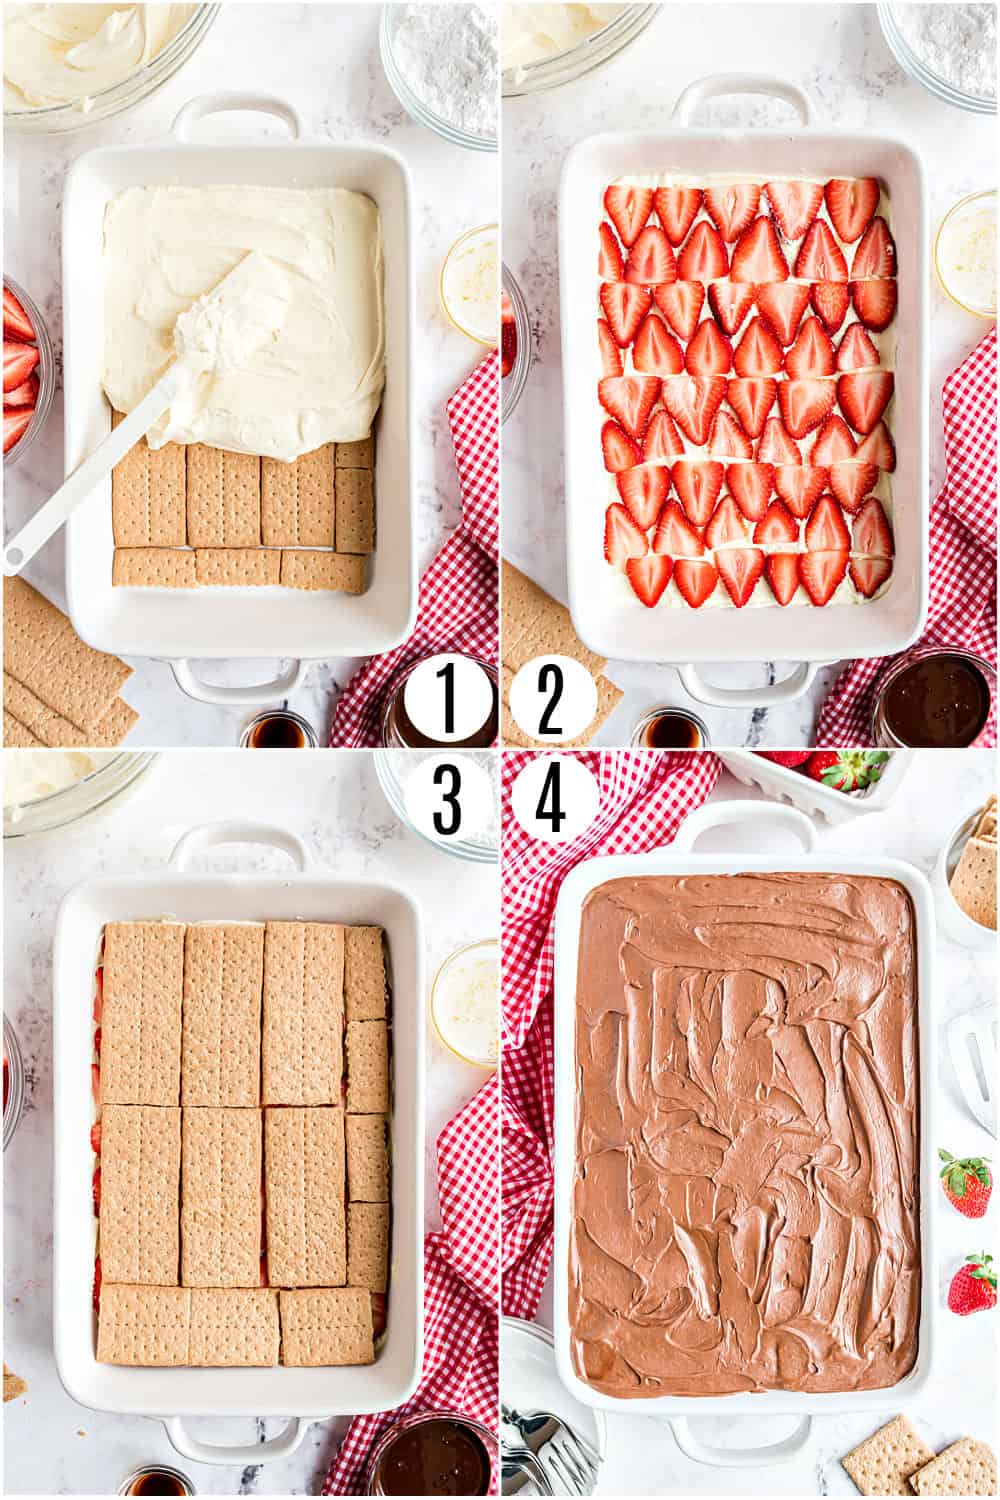 Step by step photos showing how to make strawberry eclair cake.